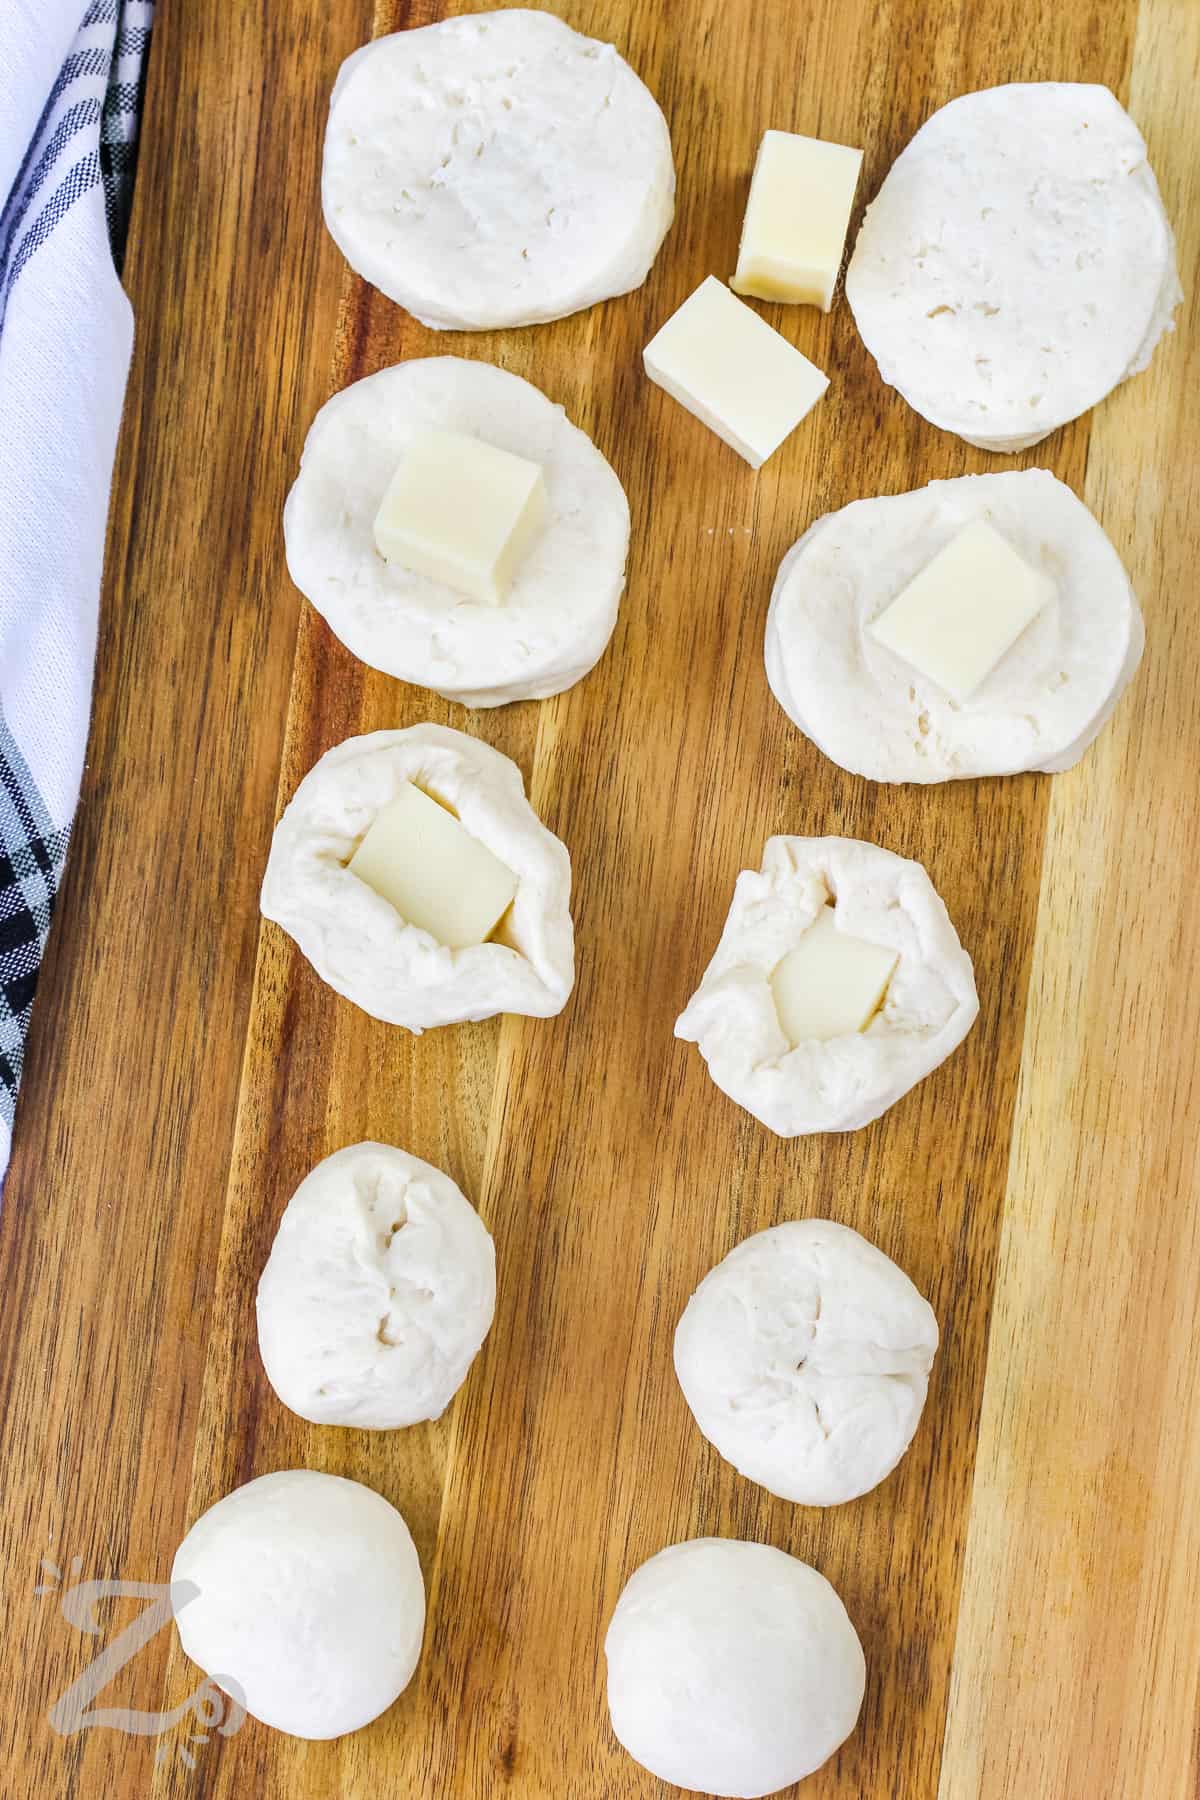 biscuits on a cutting board showing the steps to wrap them around cheese cubes.